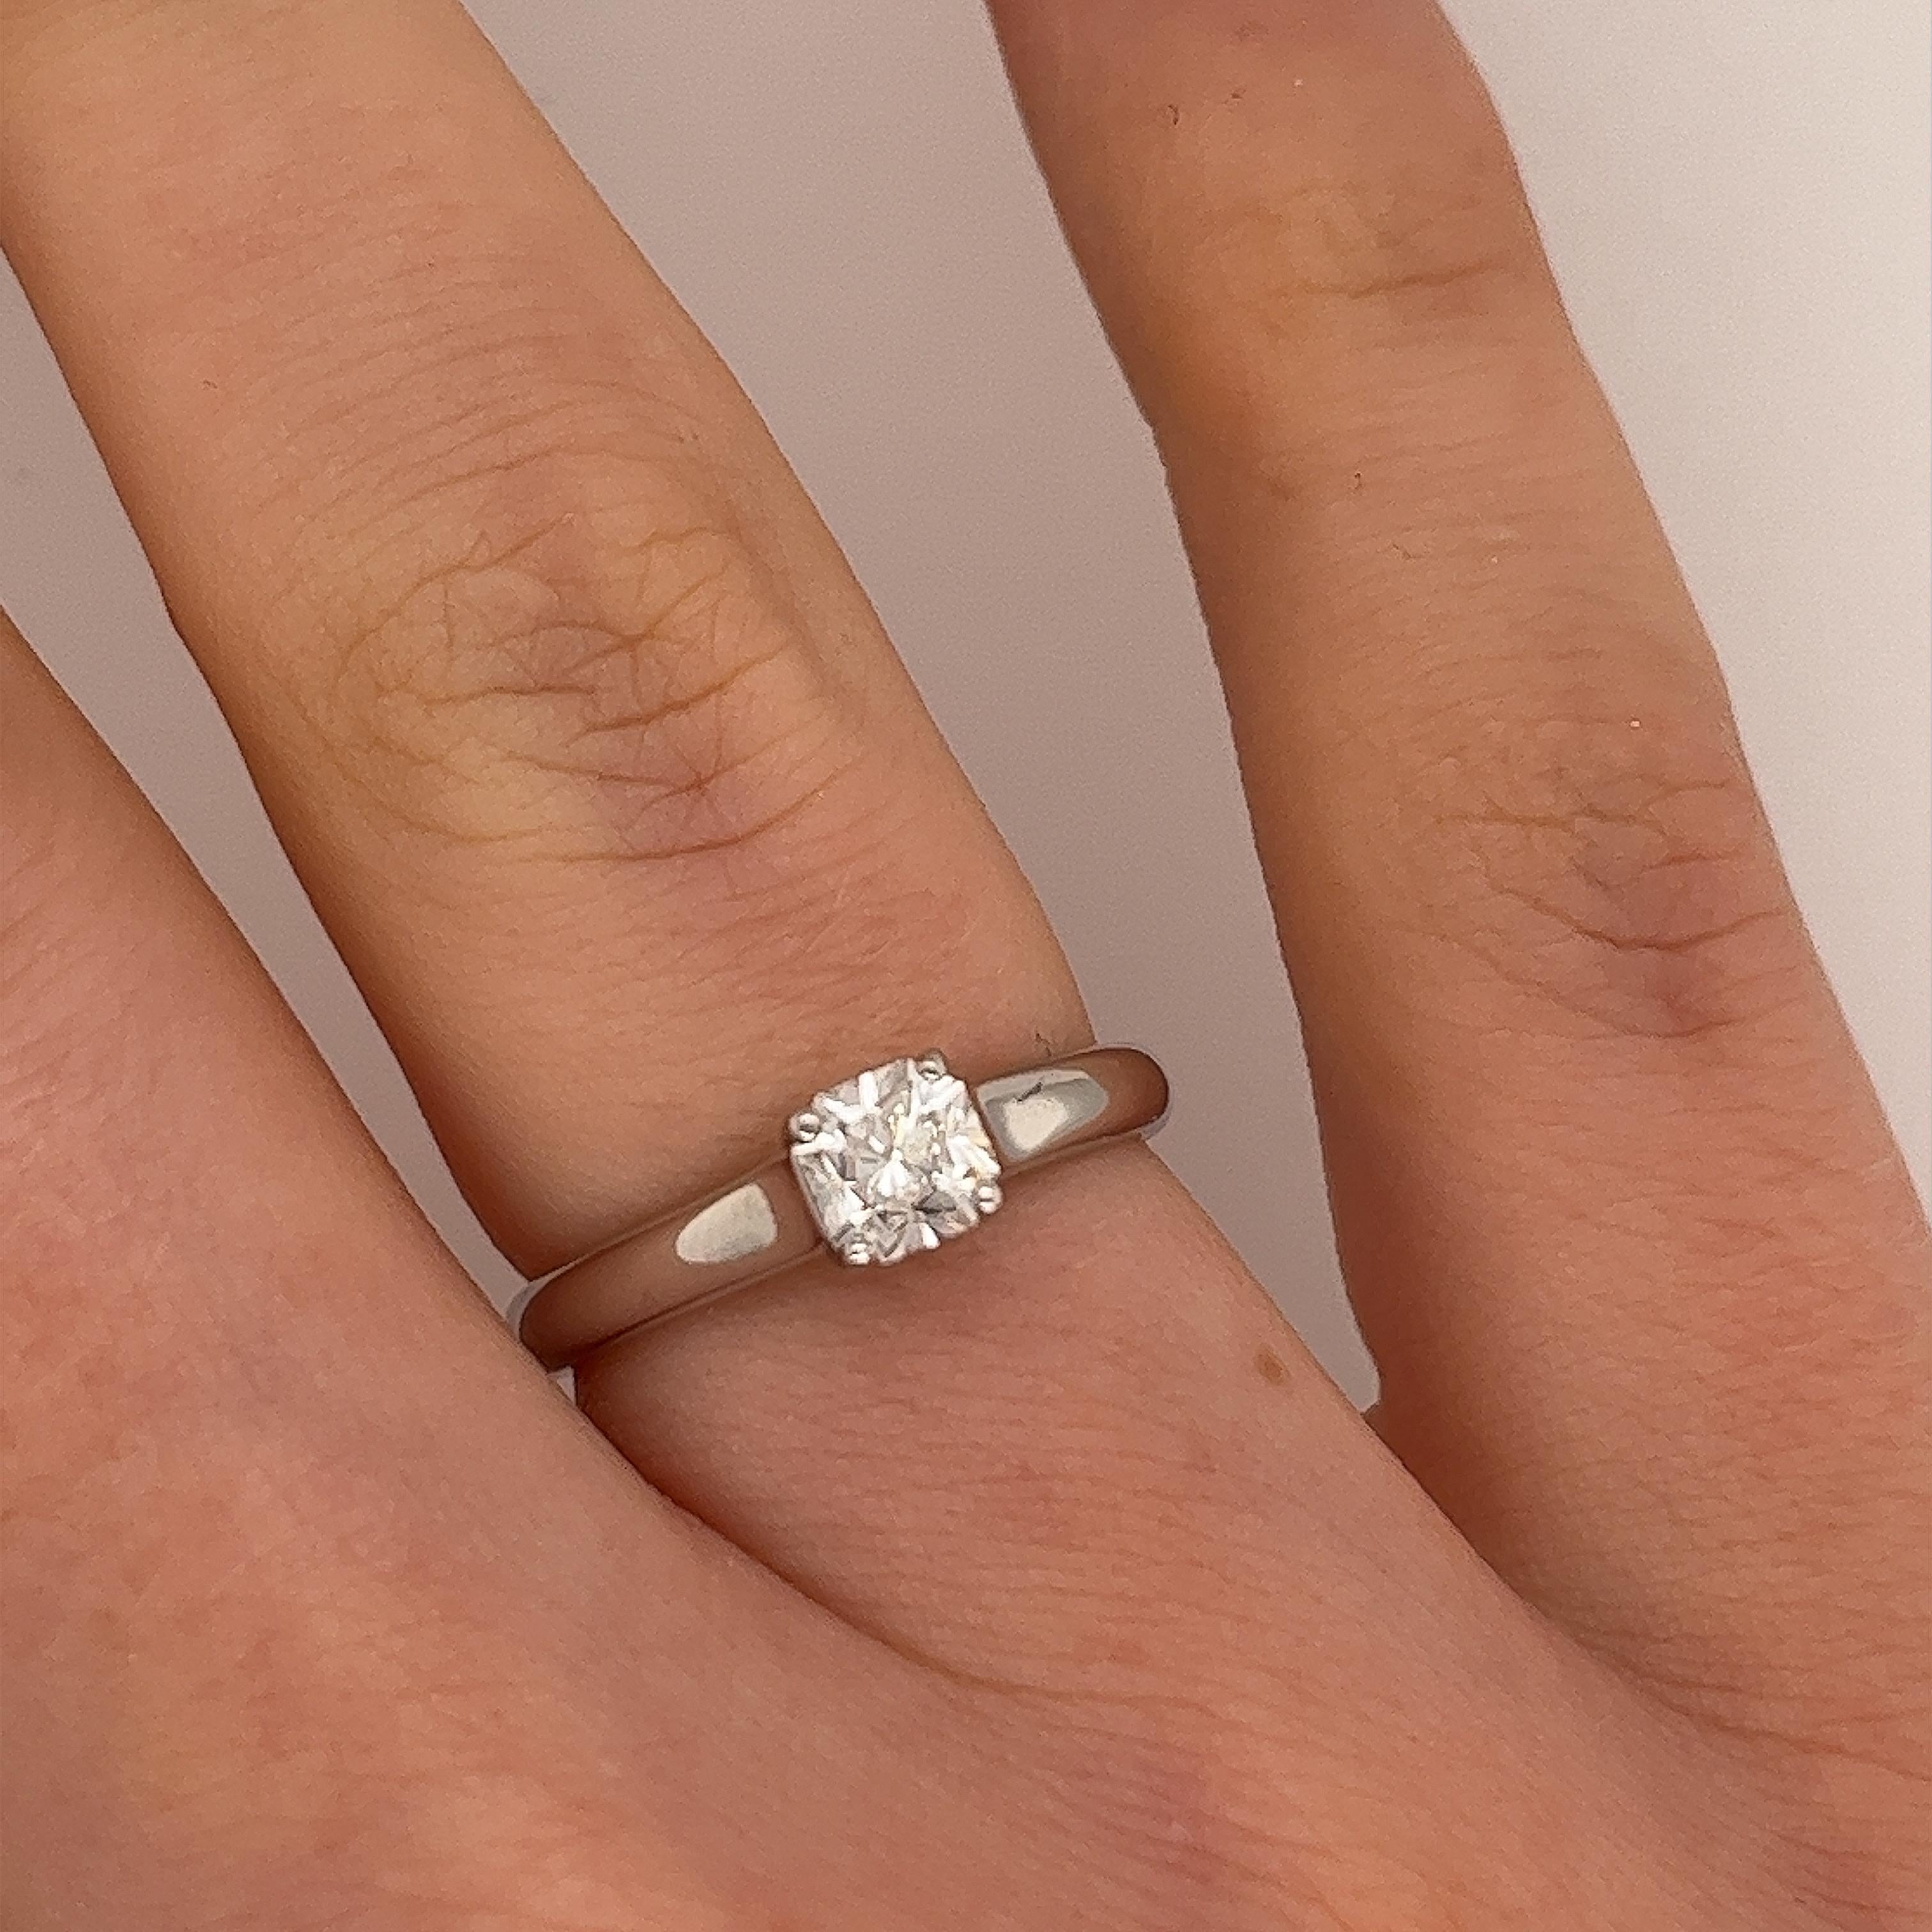 Tiffany & Co. Platinum Solitaire Engagement Ring, Set with 0.52ct E/VVS2 Diamond For Sale 1